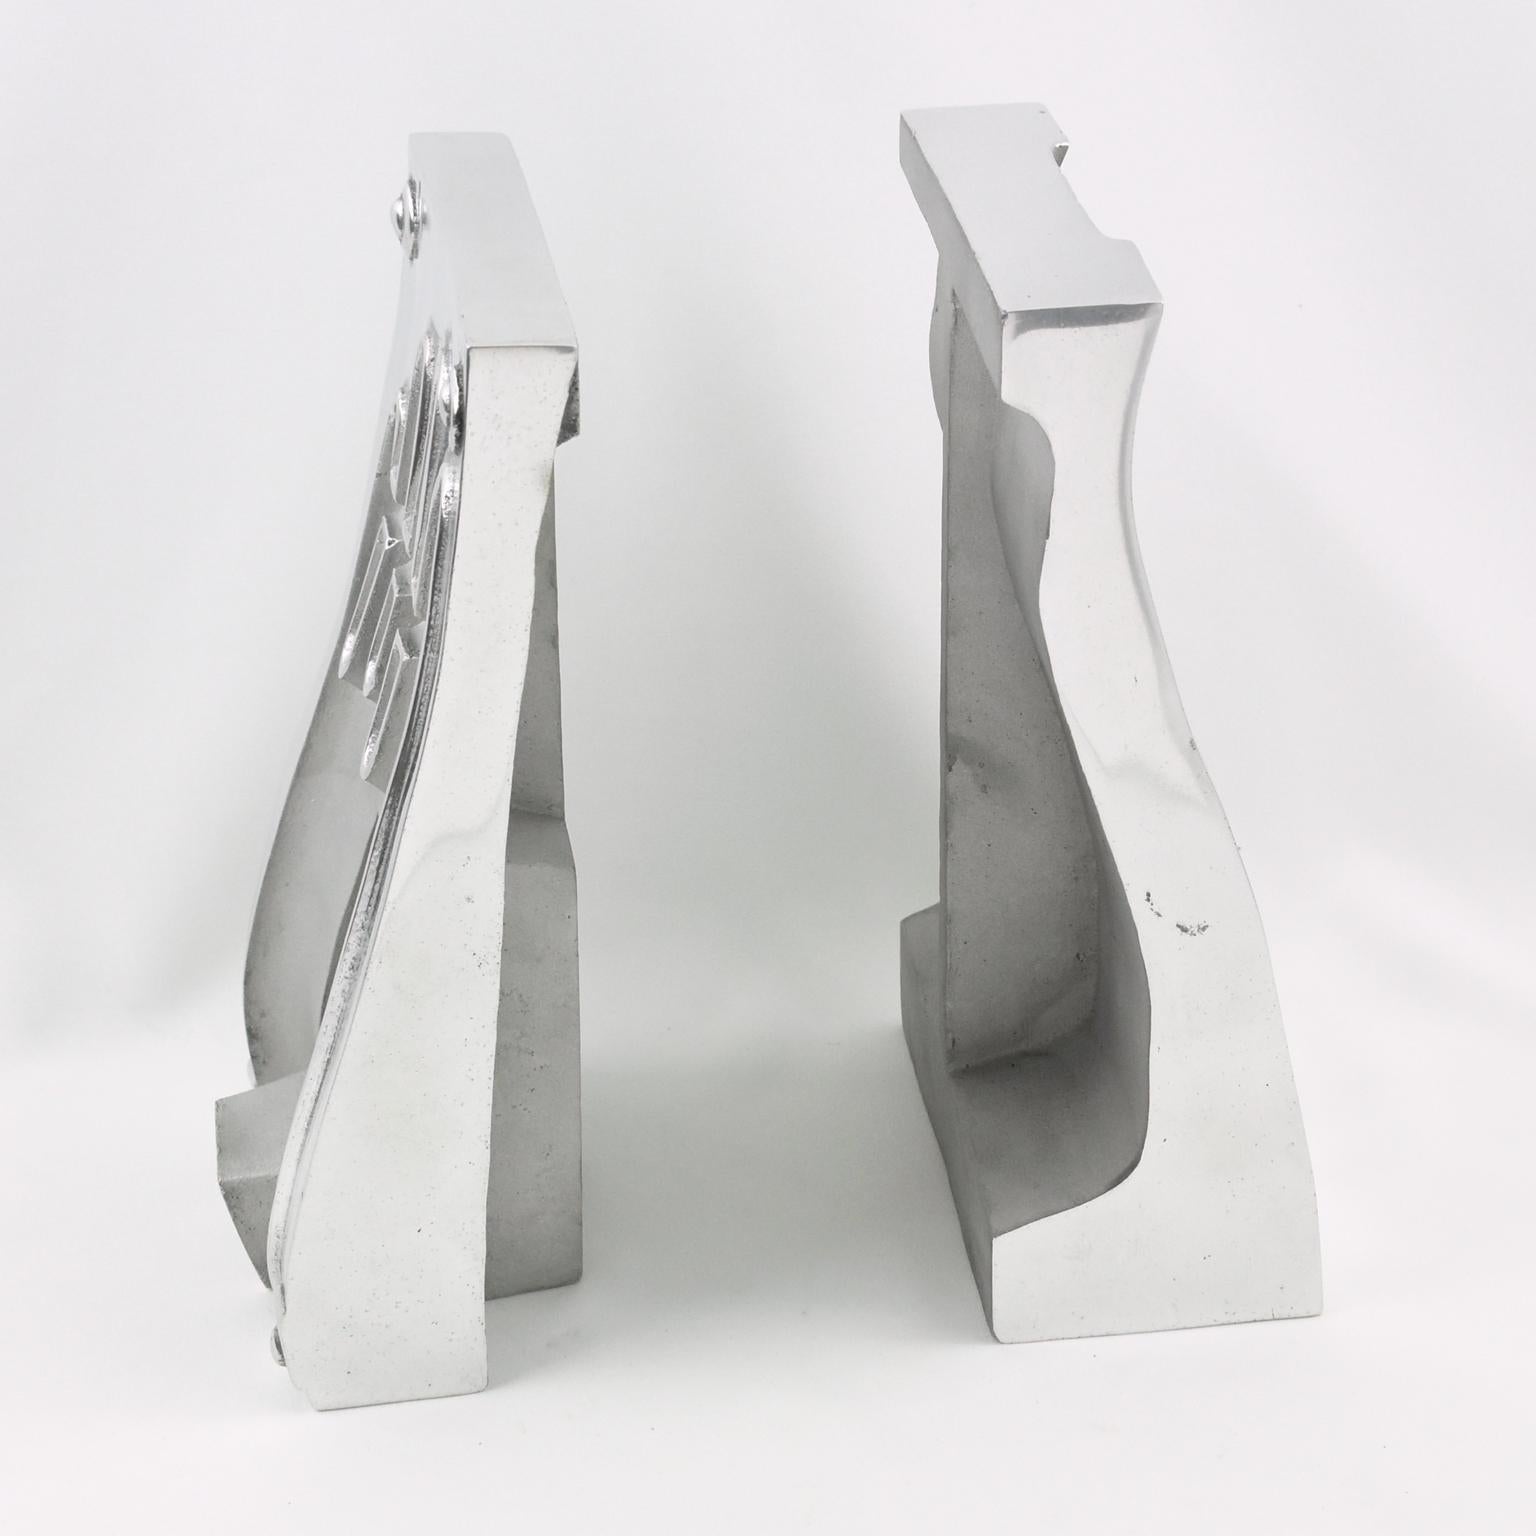 Stainless Steel Industrial Hand Glove Mold Sculpture Bookends, a pair In Excellent Condition For Sale In Atlanta, GA